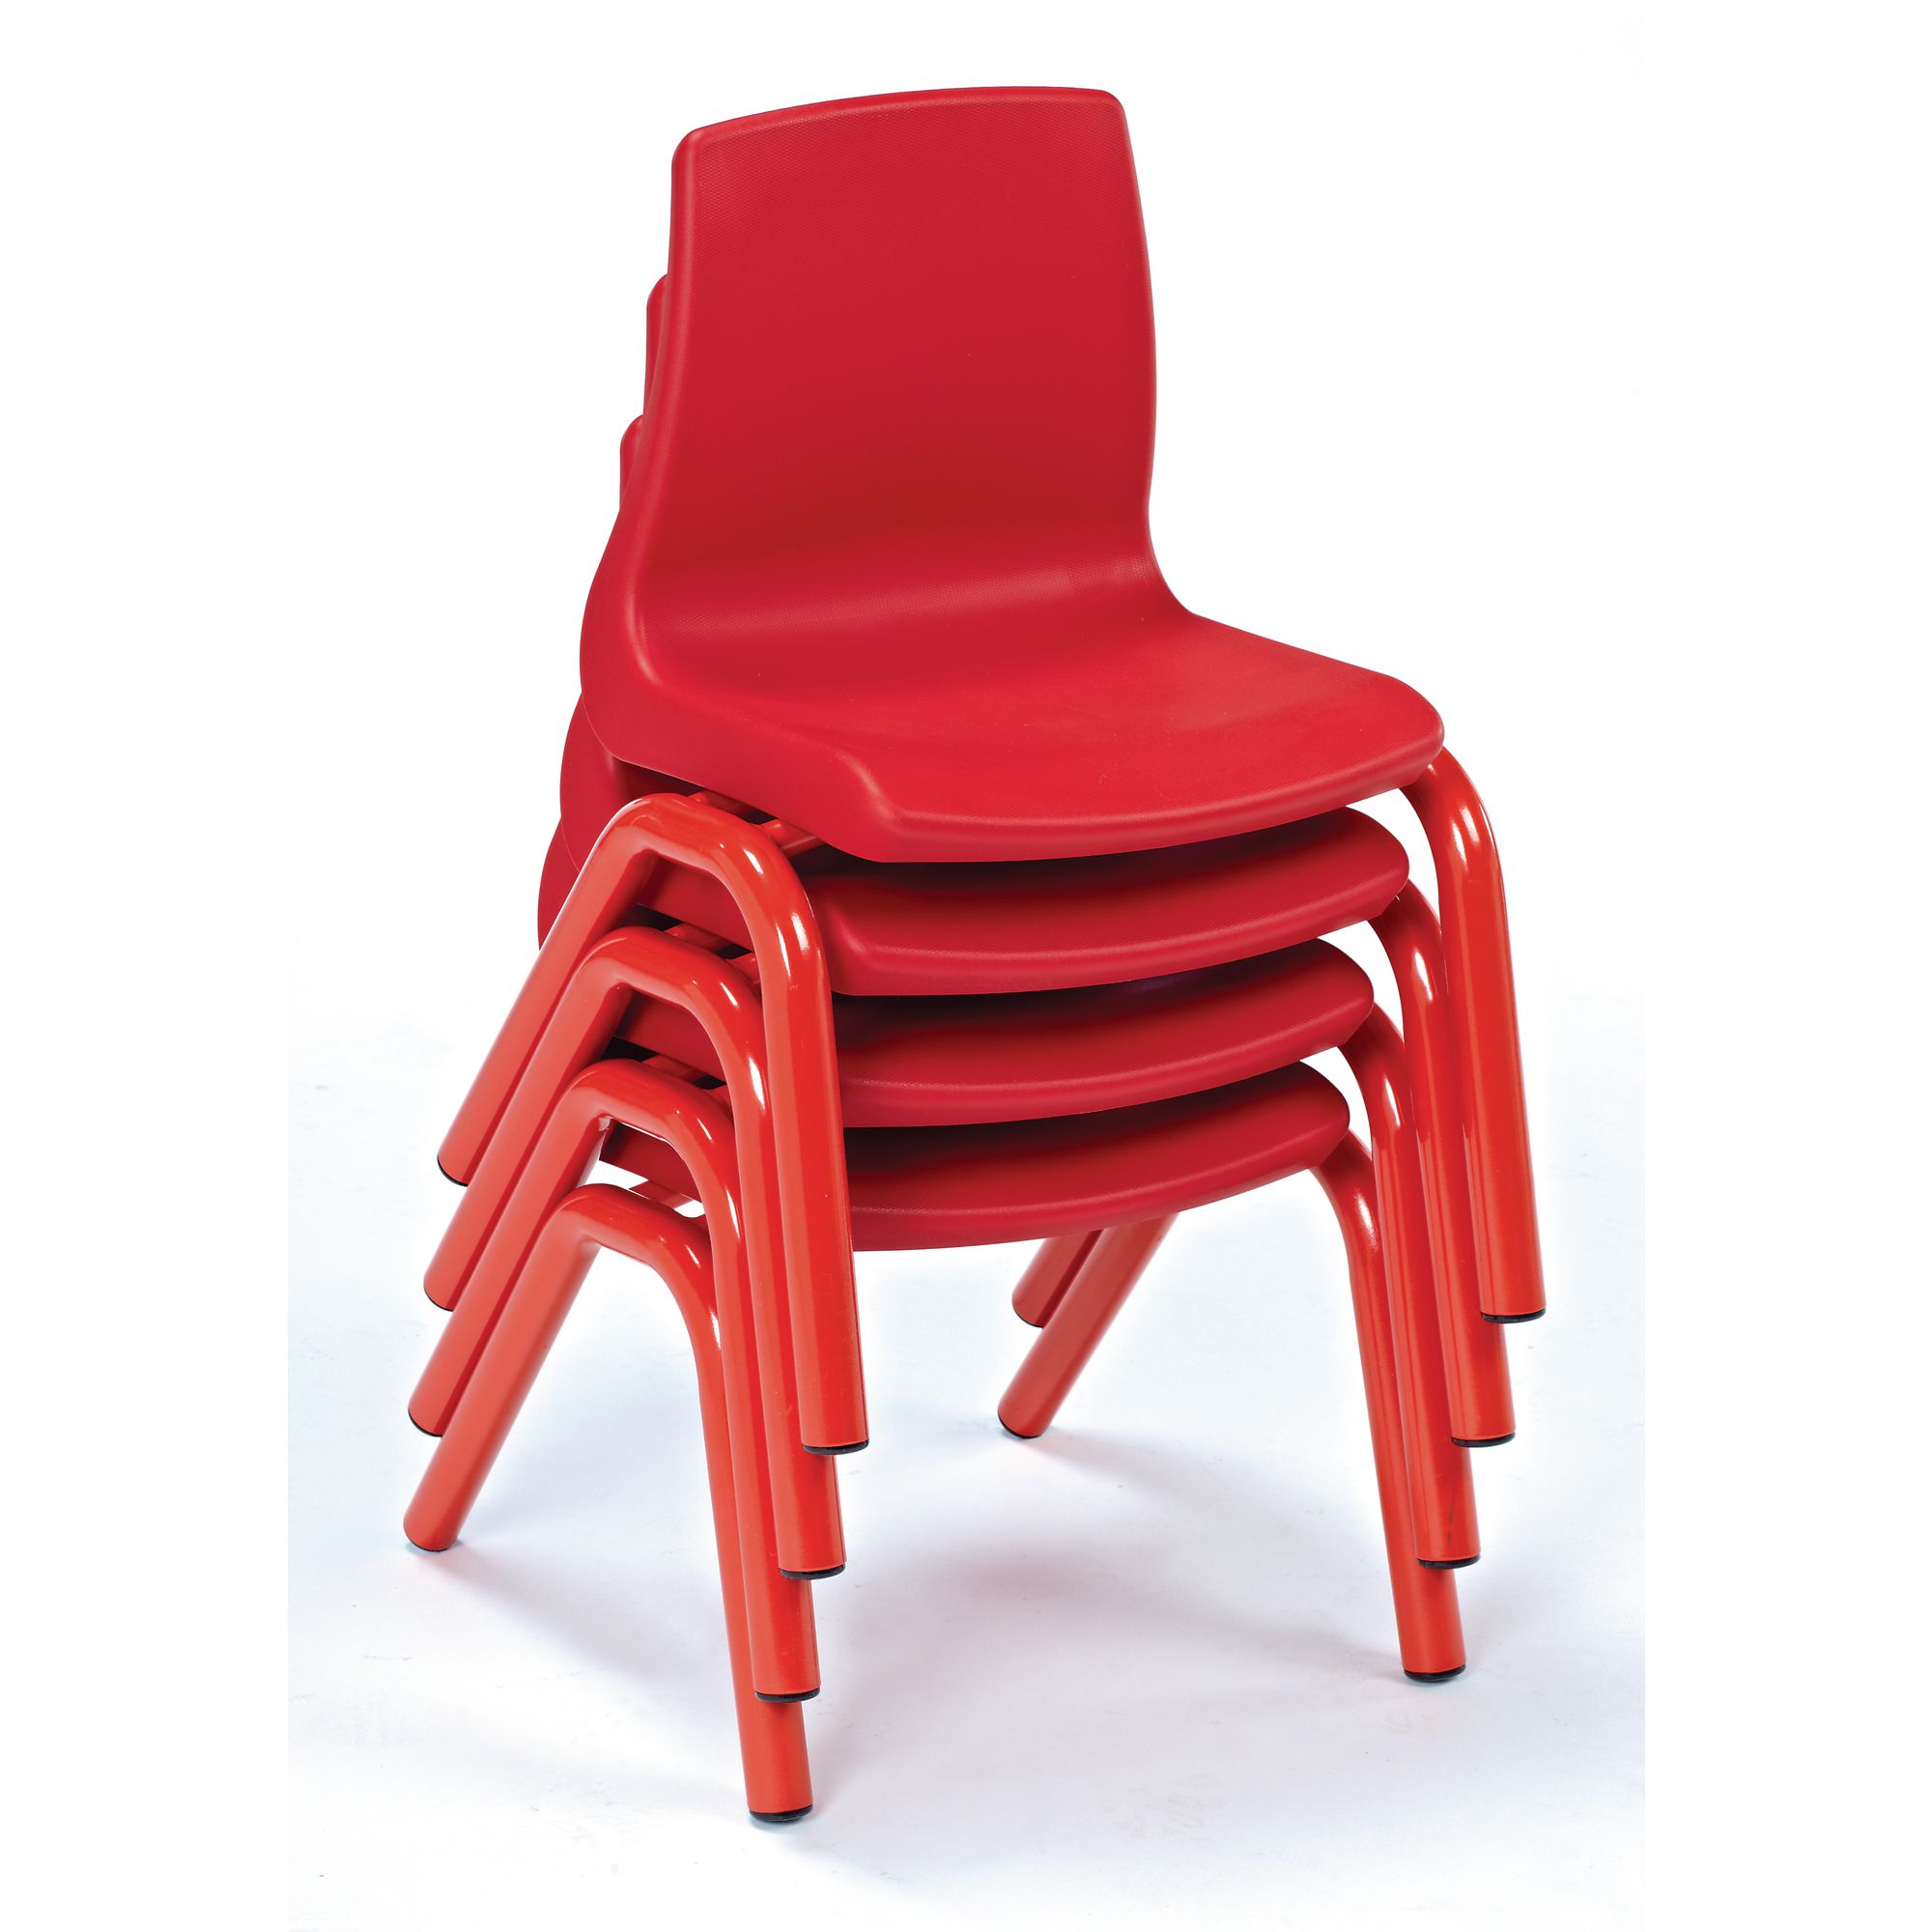 Harlequin Chairs Size A Red